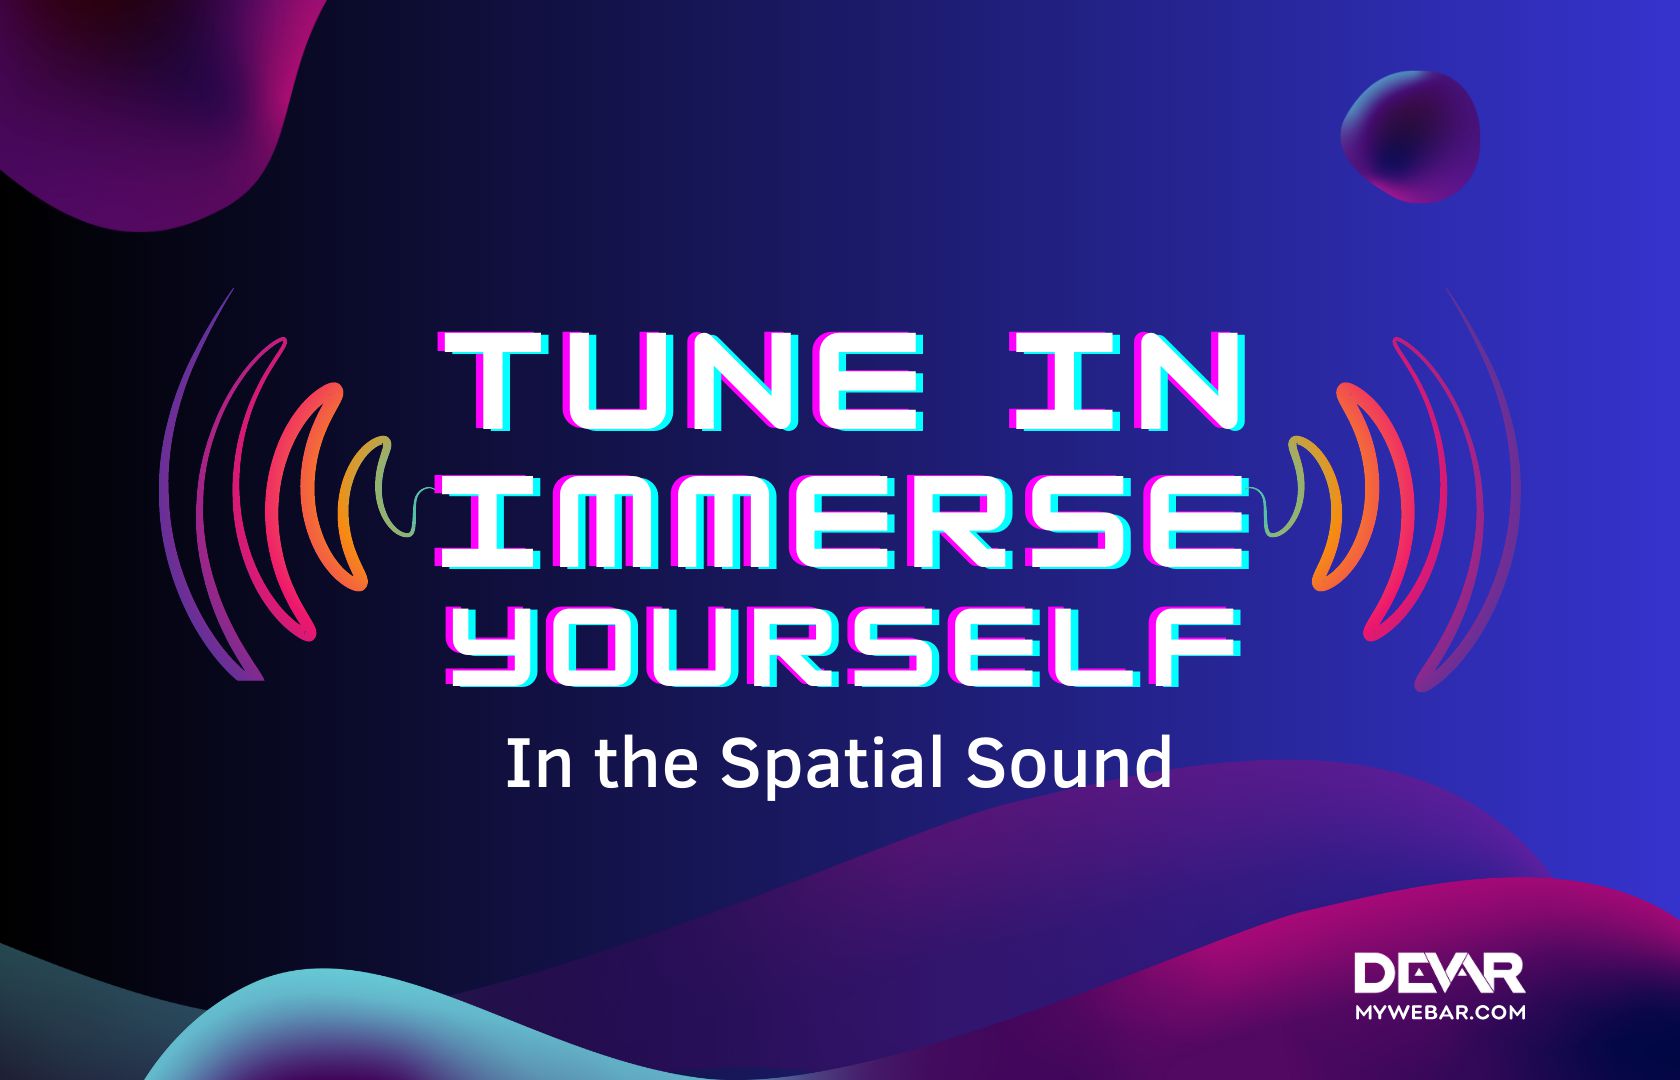 Tune In and Immerse Yourself In the Spatial Sound